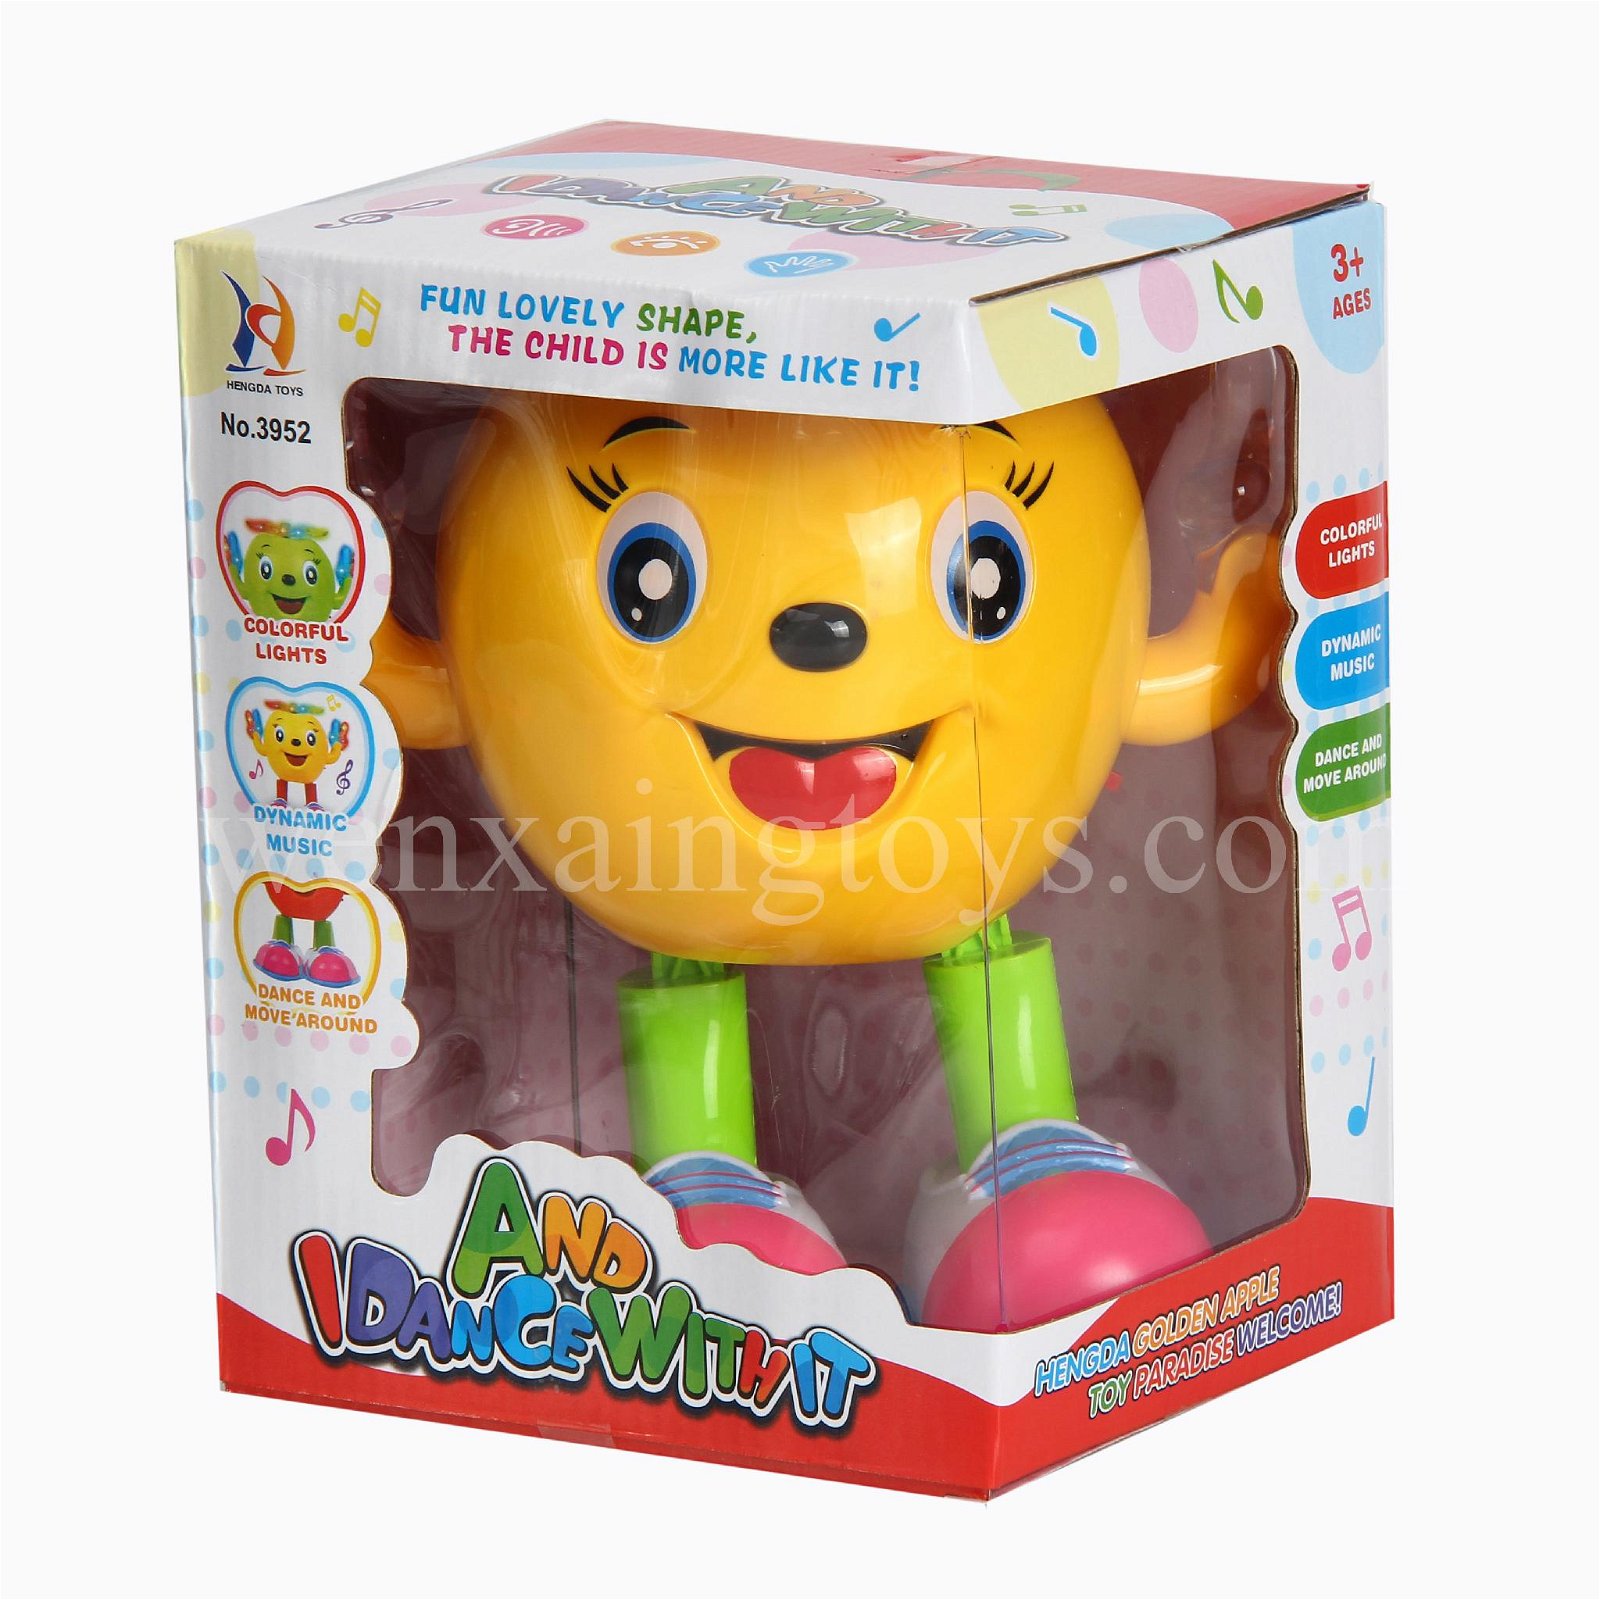 Plastic electric baby dancing apple toy 2